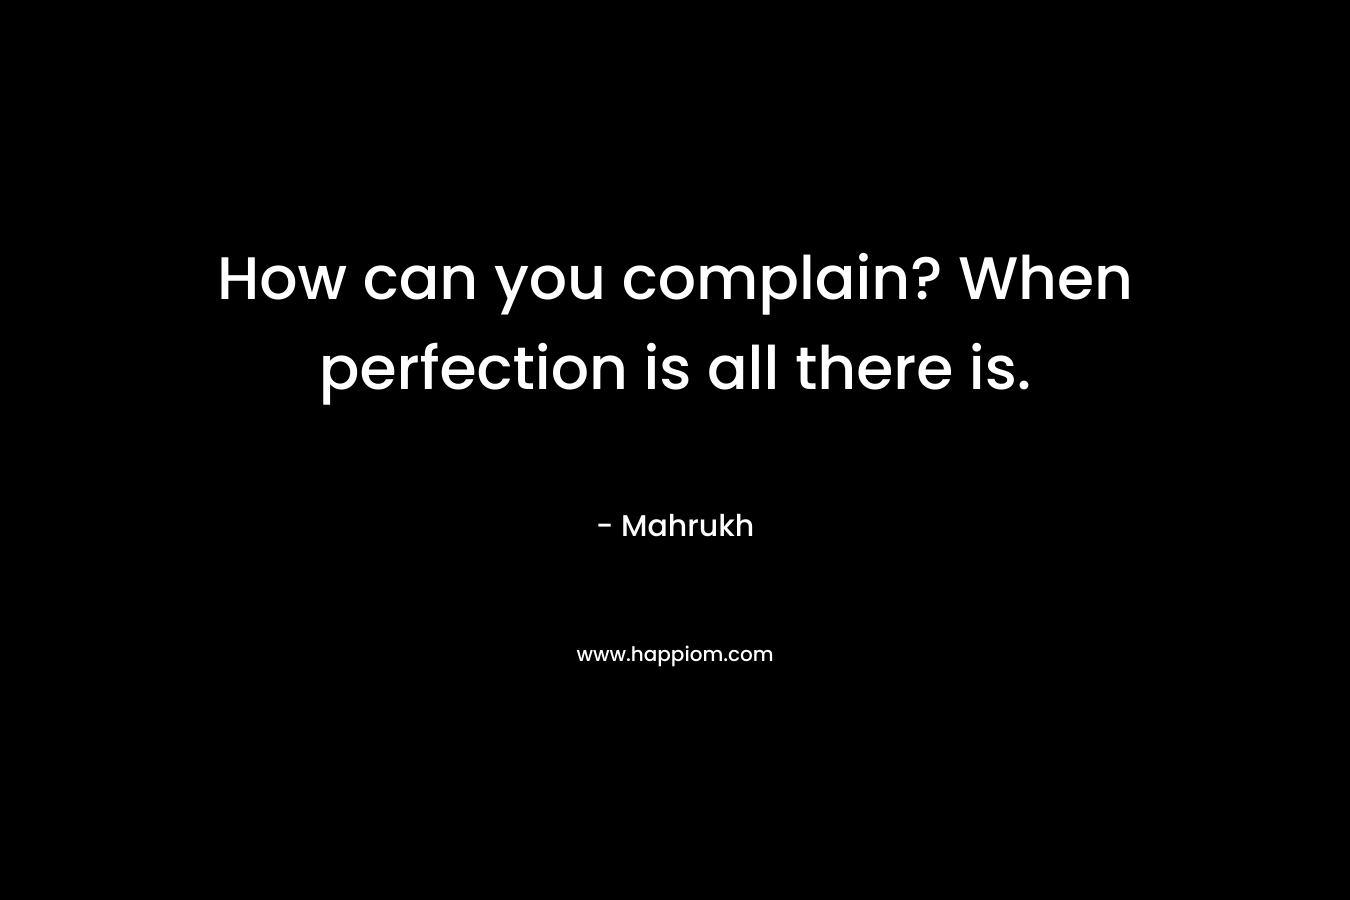 How can you complain? When perfection is all there is. – Mahrukh